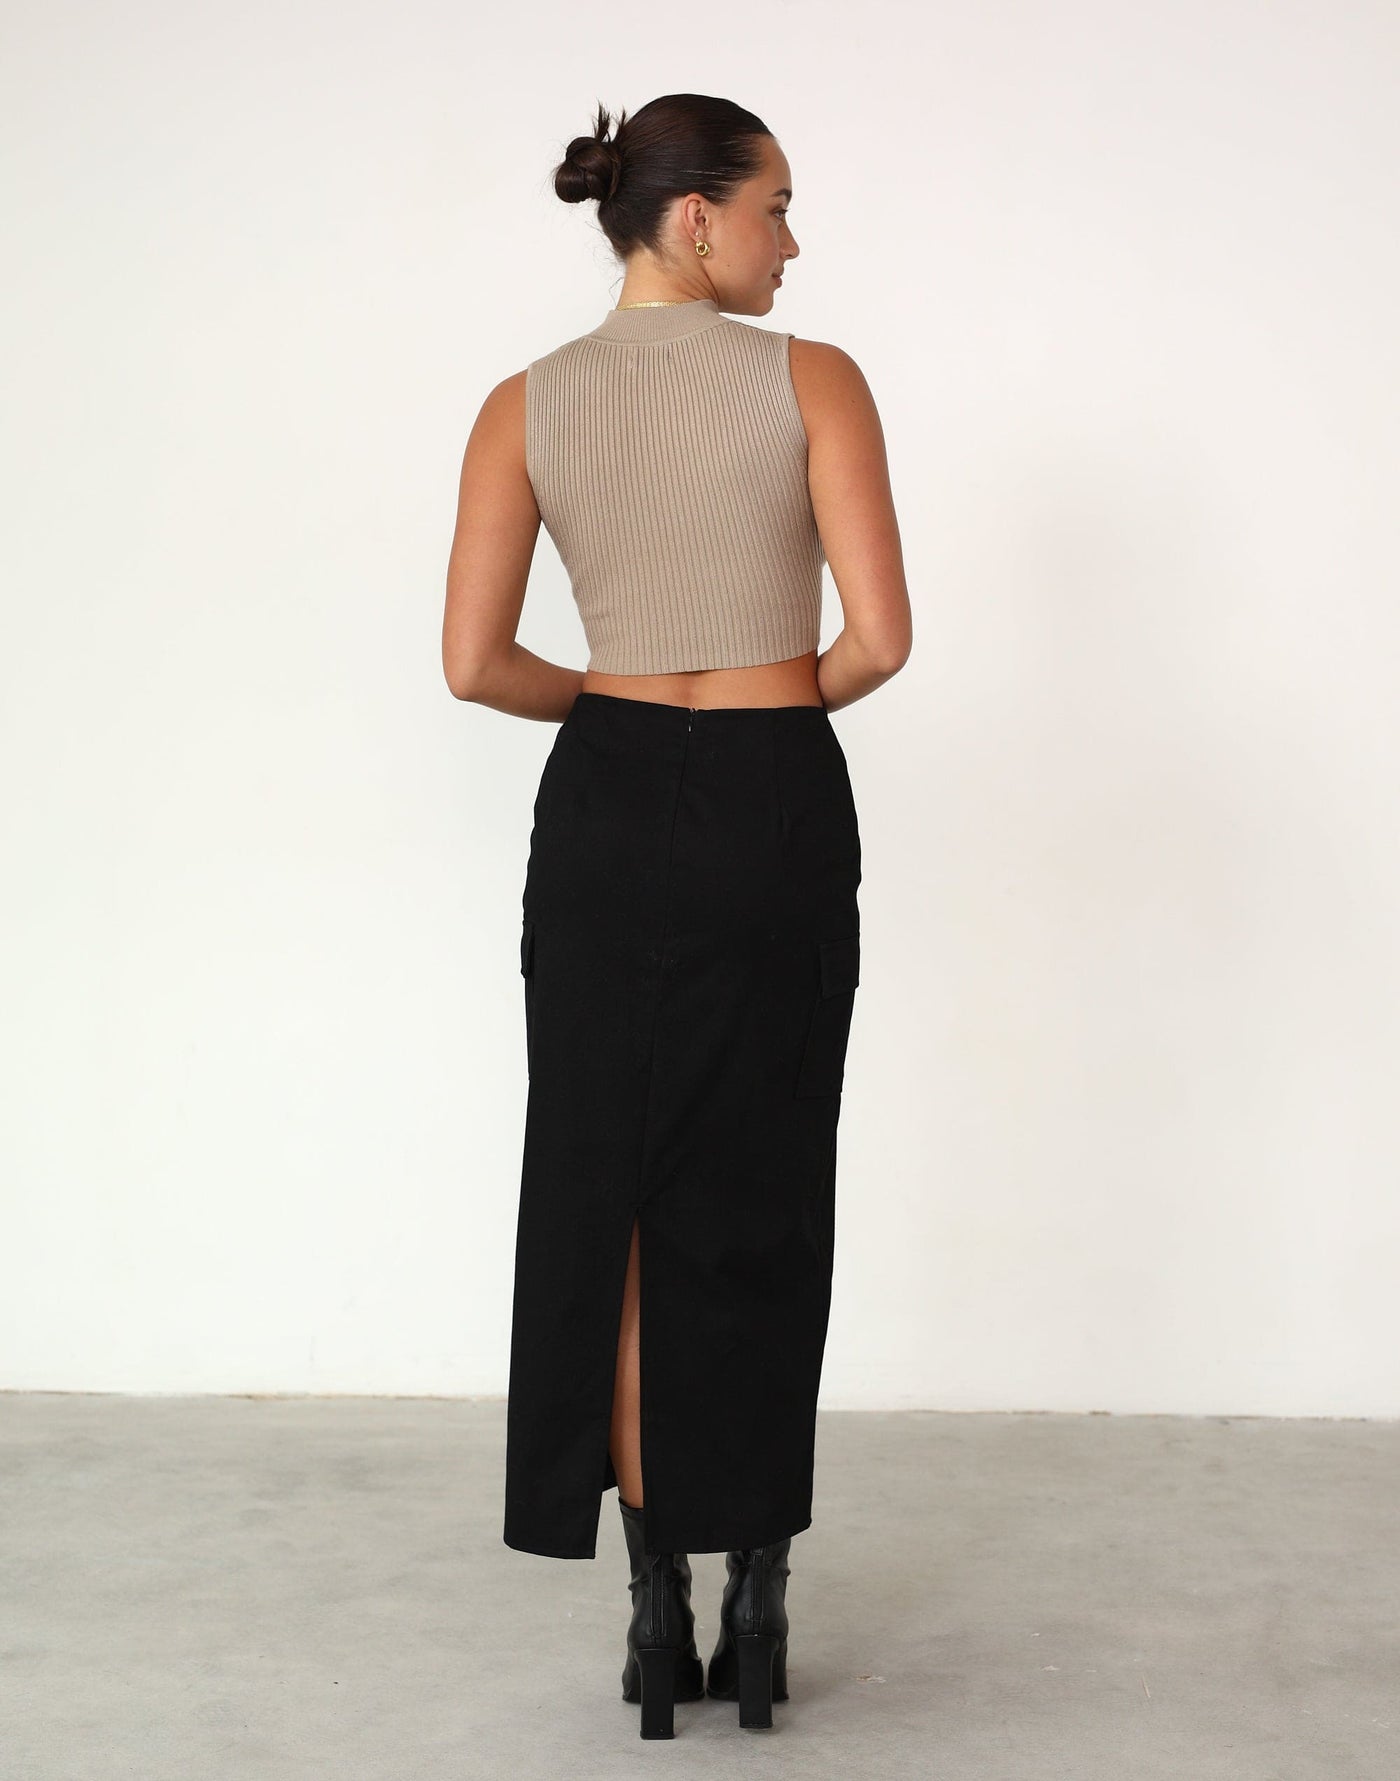 Lyka Top (Stone) - High Neck Cropped Cut Out Top - Women's Tops - Charcoal Clothing